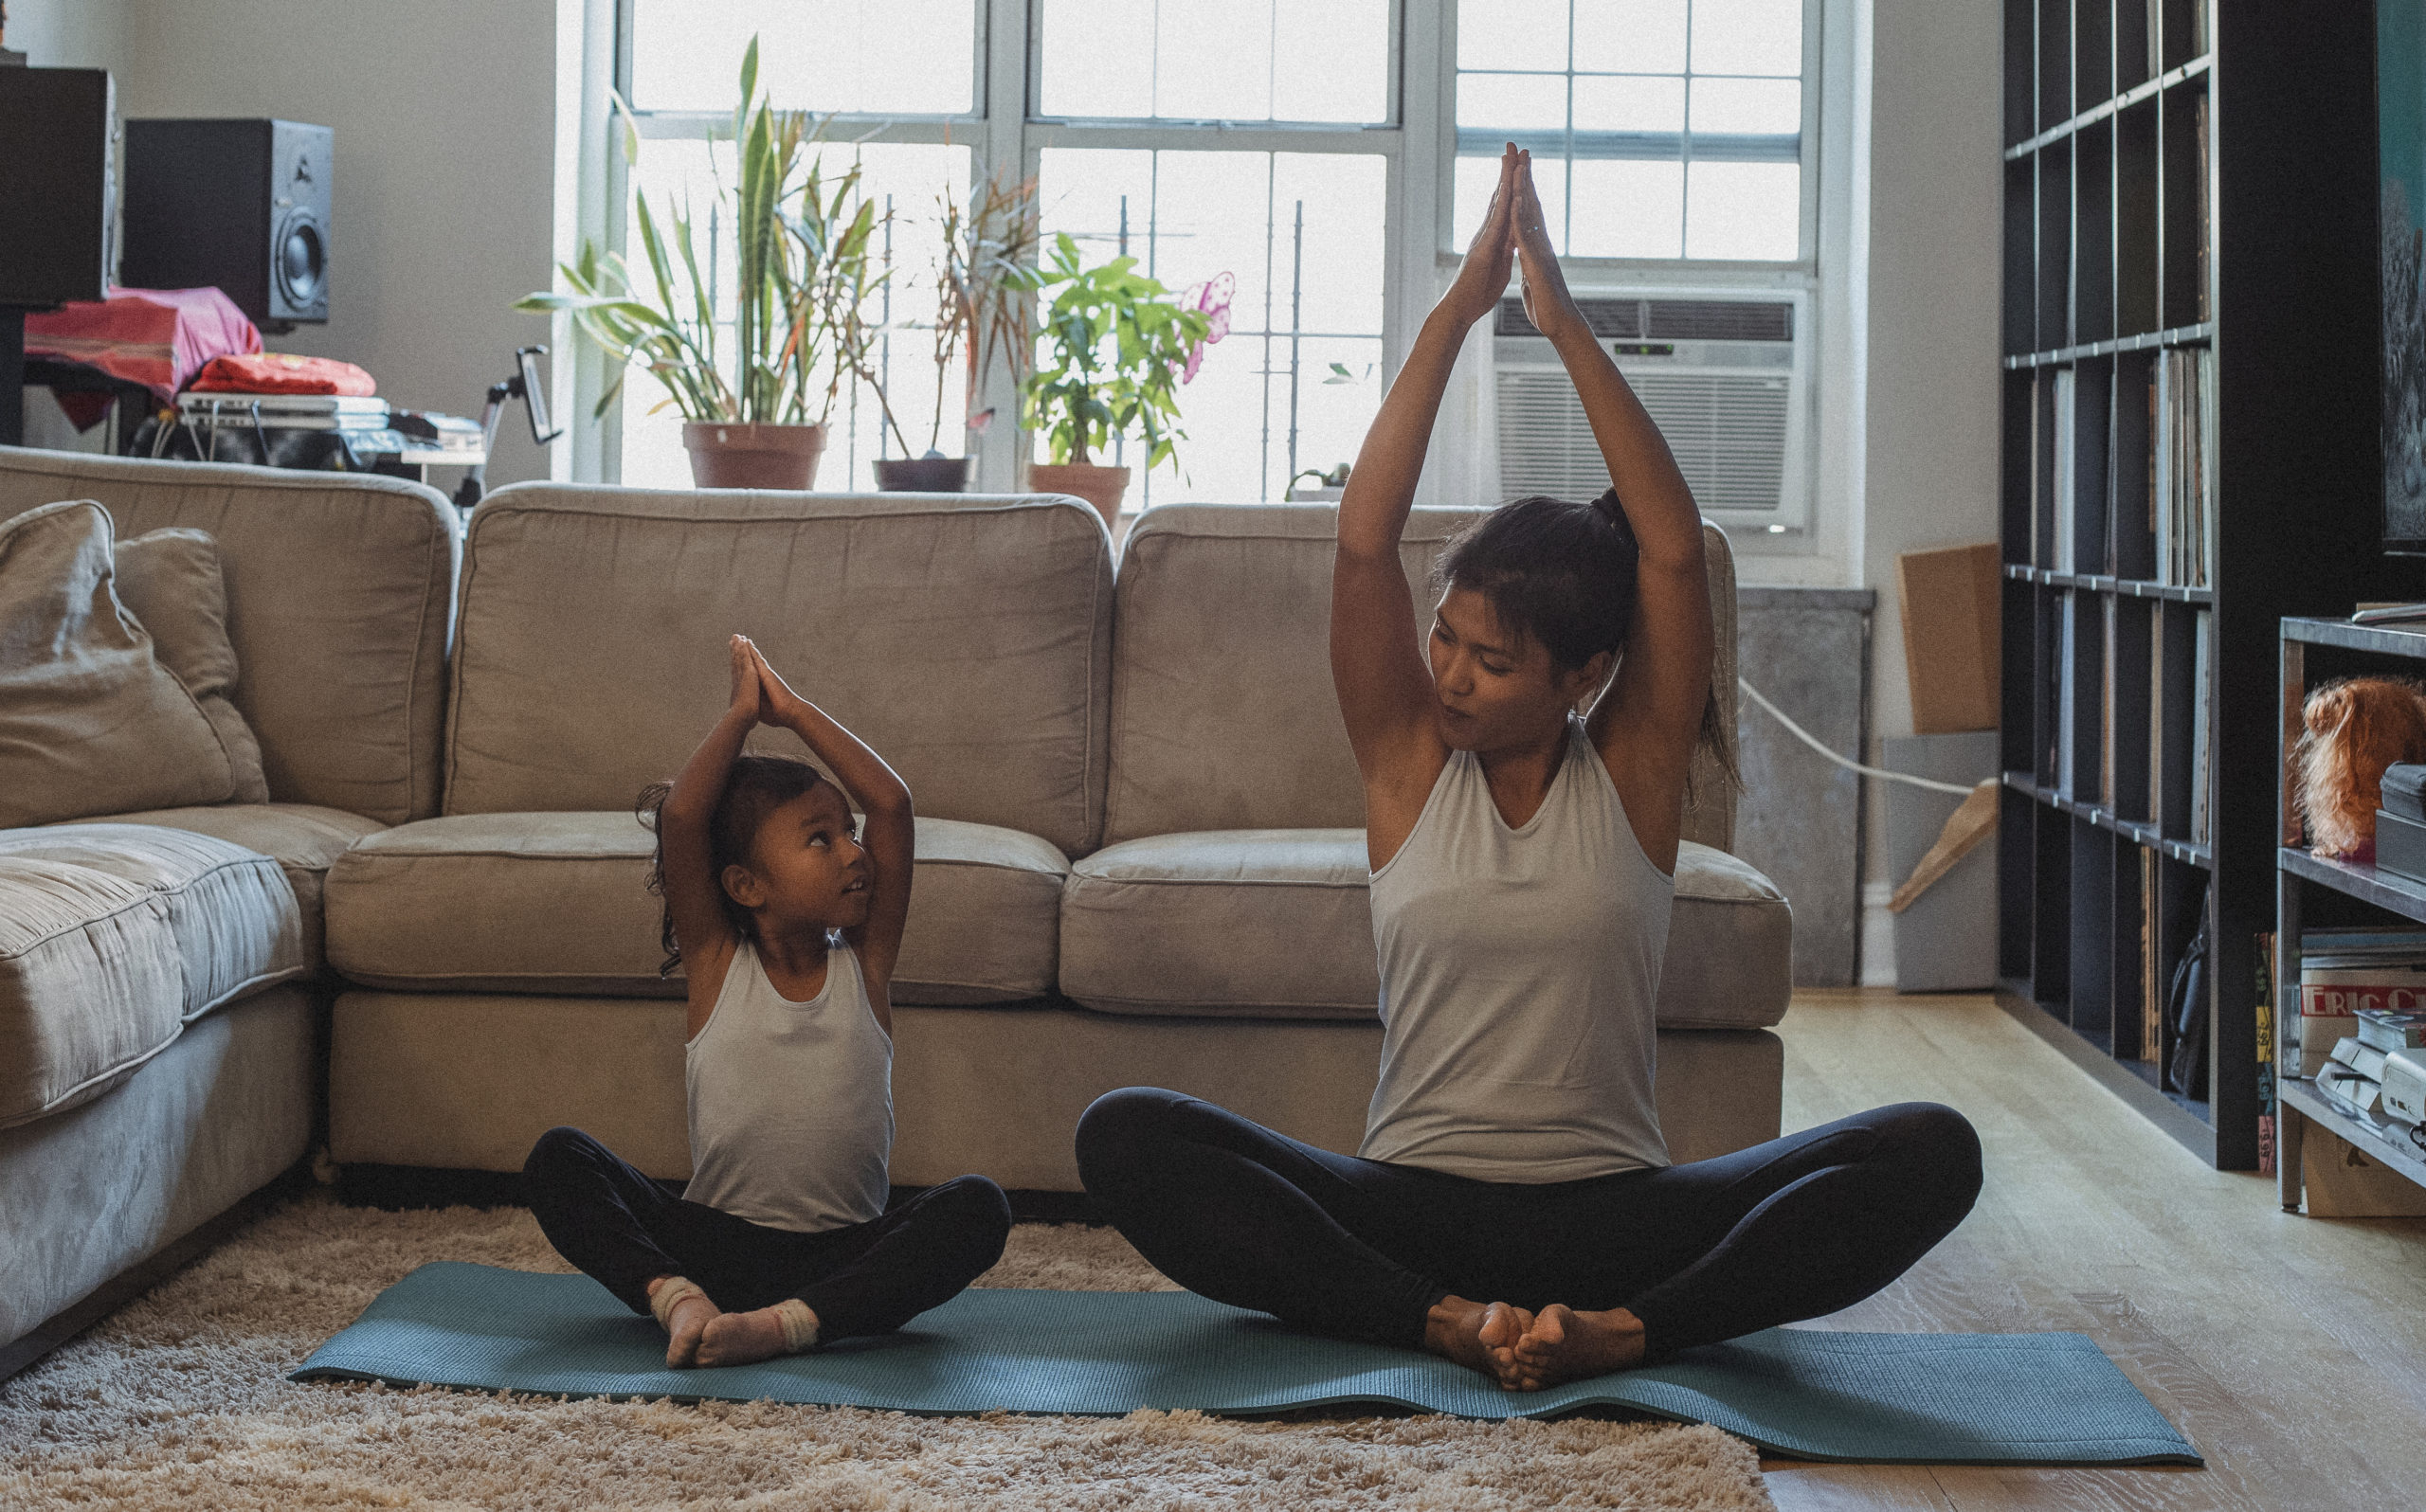 yoga for moms, benefits of yoga for kids, daily yoga benefits, family benefits of yoga, full body workout, importance of yoga, kids yoga, mental benefits of yoga, mindfulness, mother and baby yoga, new mom yoga, physical benefits of yoga, unexpected benefits of yoga, workout, yoga, yoga benefits, yoga for moms, yoga is great for moms